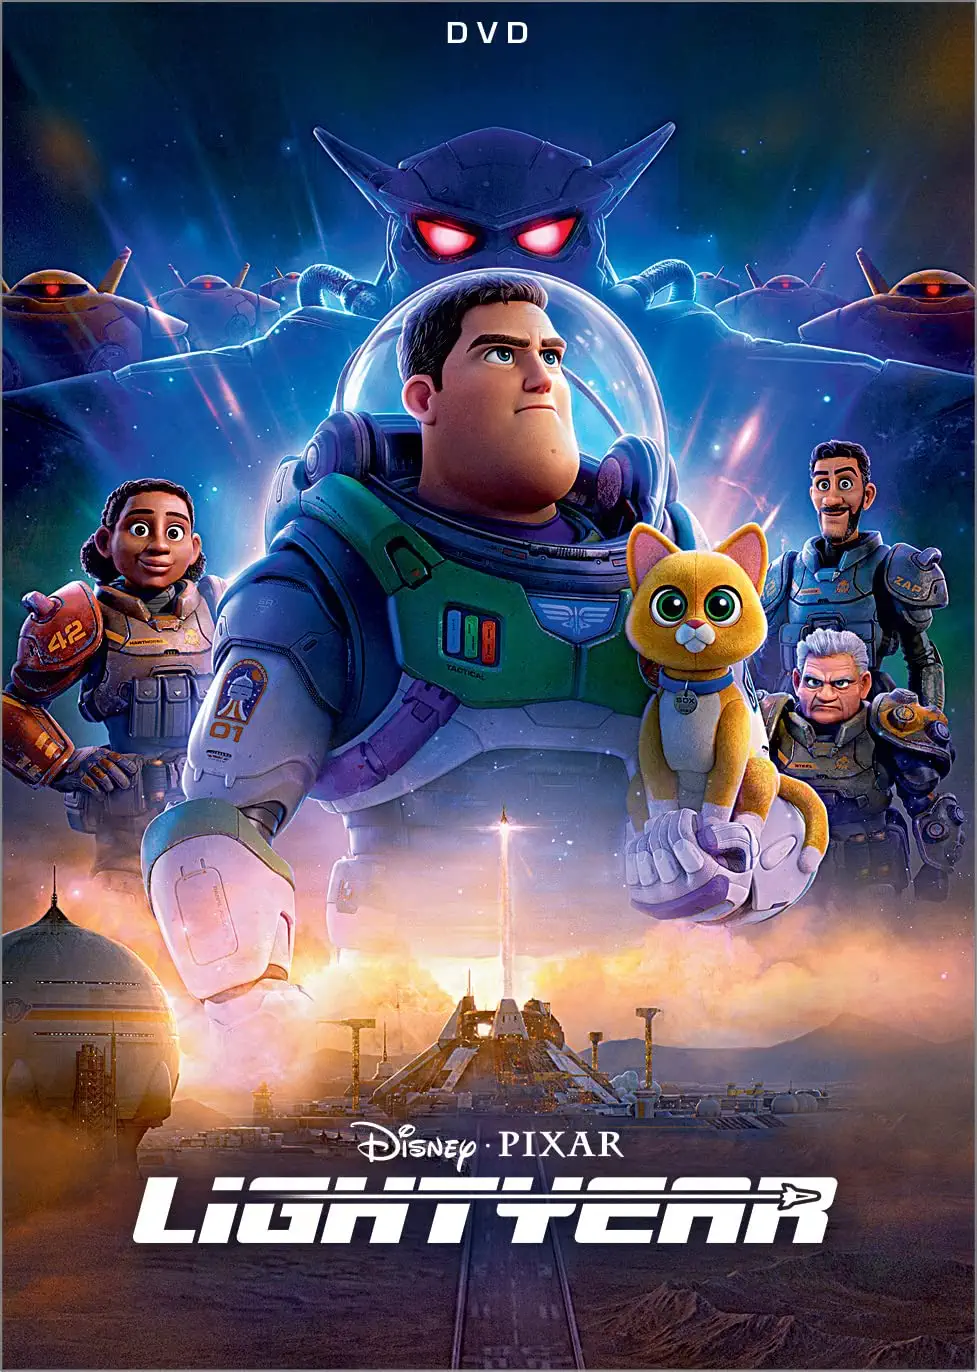 Image for "Lightyear"